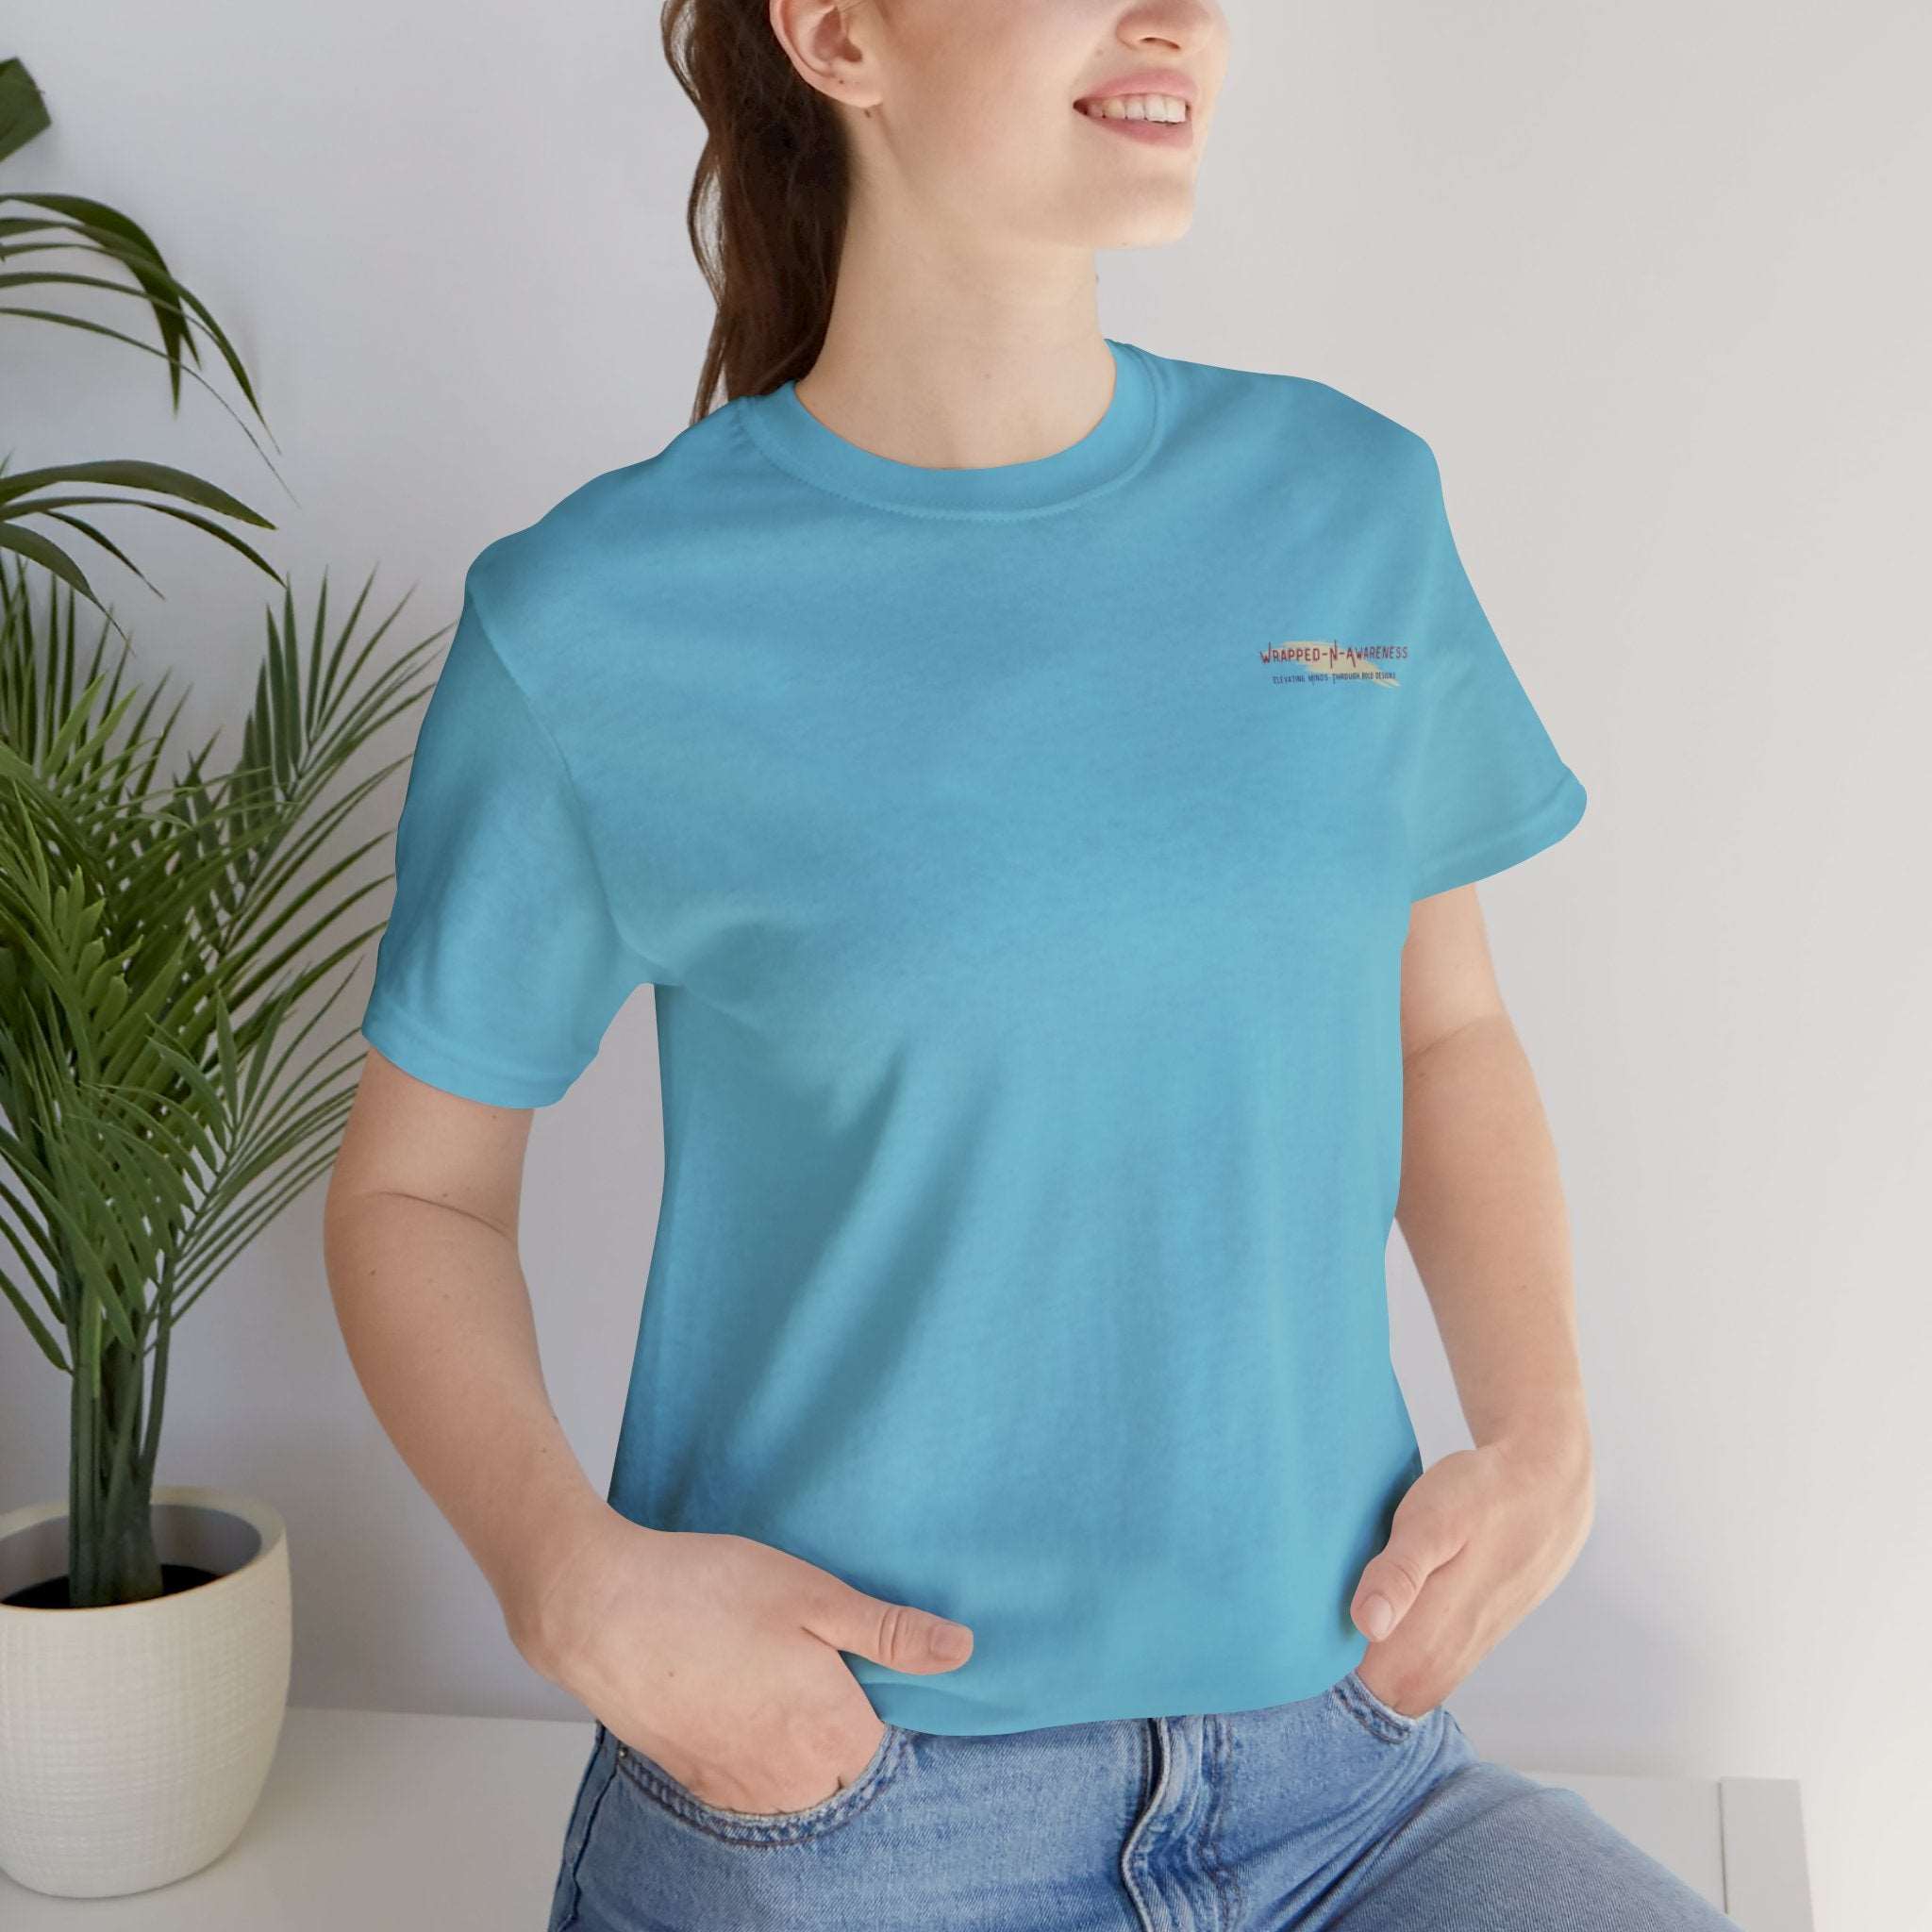 Embrace Self-Care Jersey Tee - Bella+Canvas 3001 Heather Mauve Airlume Cotton Bella+Canvas 3001 Crew Neckline Jersey Short Sleeve Lightweight Fabric Mental Health Support Retail Fit Tear-away Label Tee Unisex Tee T-Shirt 6207617867334153929_2048_d318110a-39b3-4751-af2f-1c8d1eecd9b3 Printify